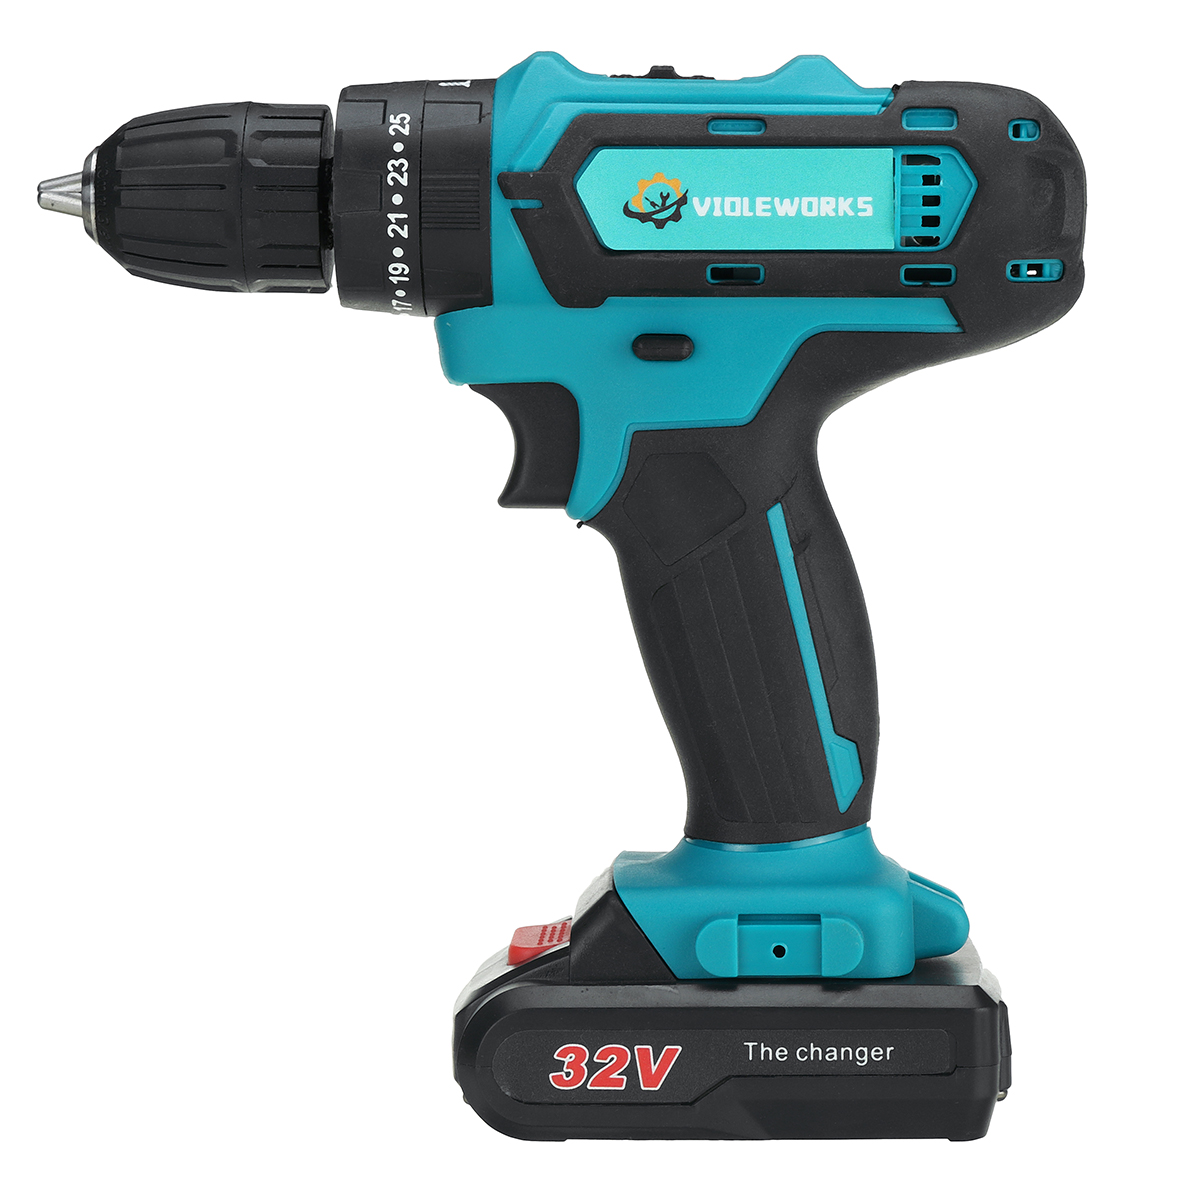 2-Speed-Power-Drills-6000mah-Cordless-Drill-3-IN-1-Electric-Screwdriver-Hammer-Drill-with-2pcs-Batte-1416071-7